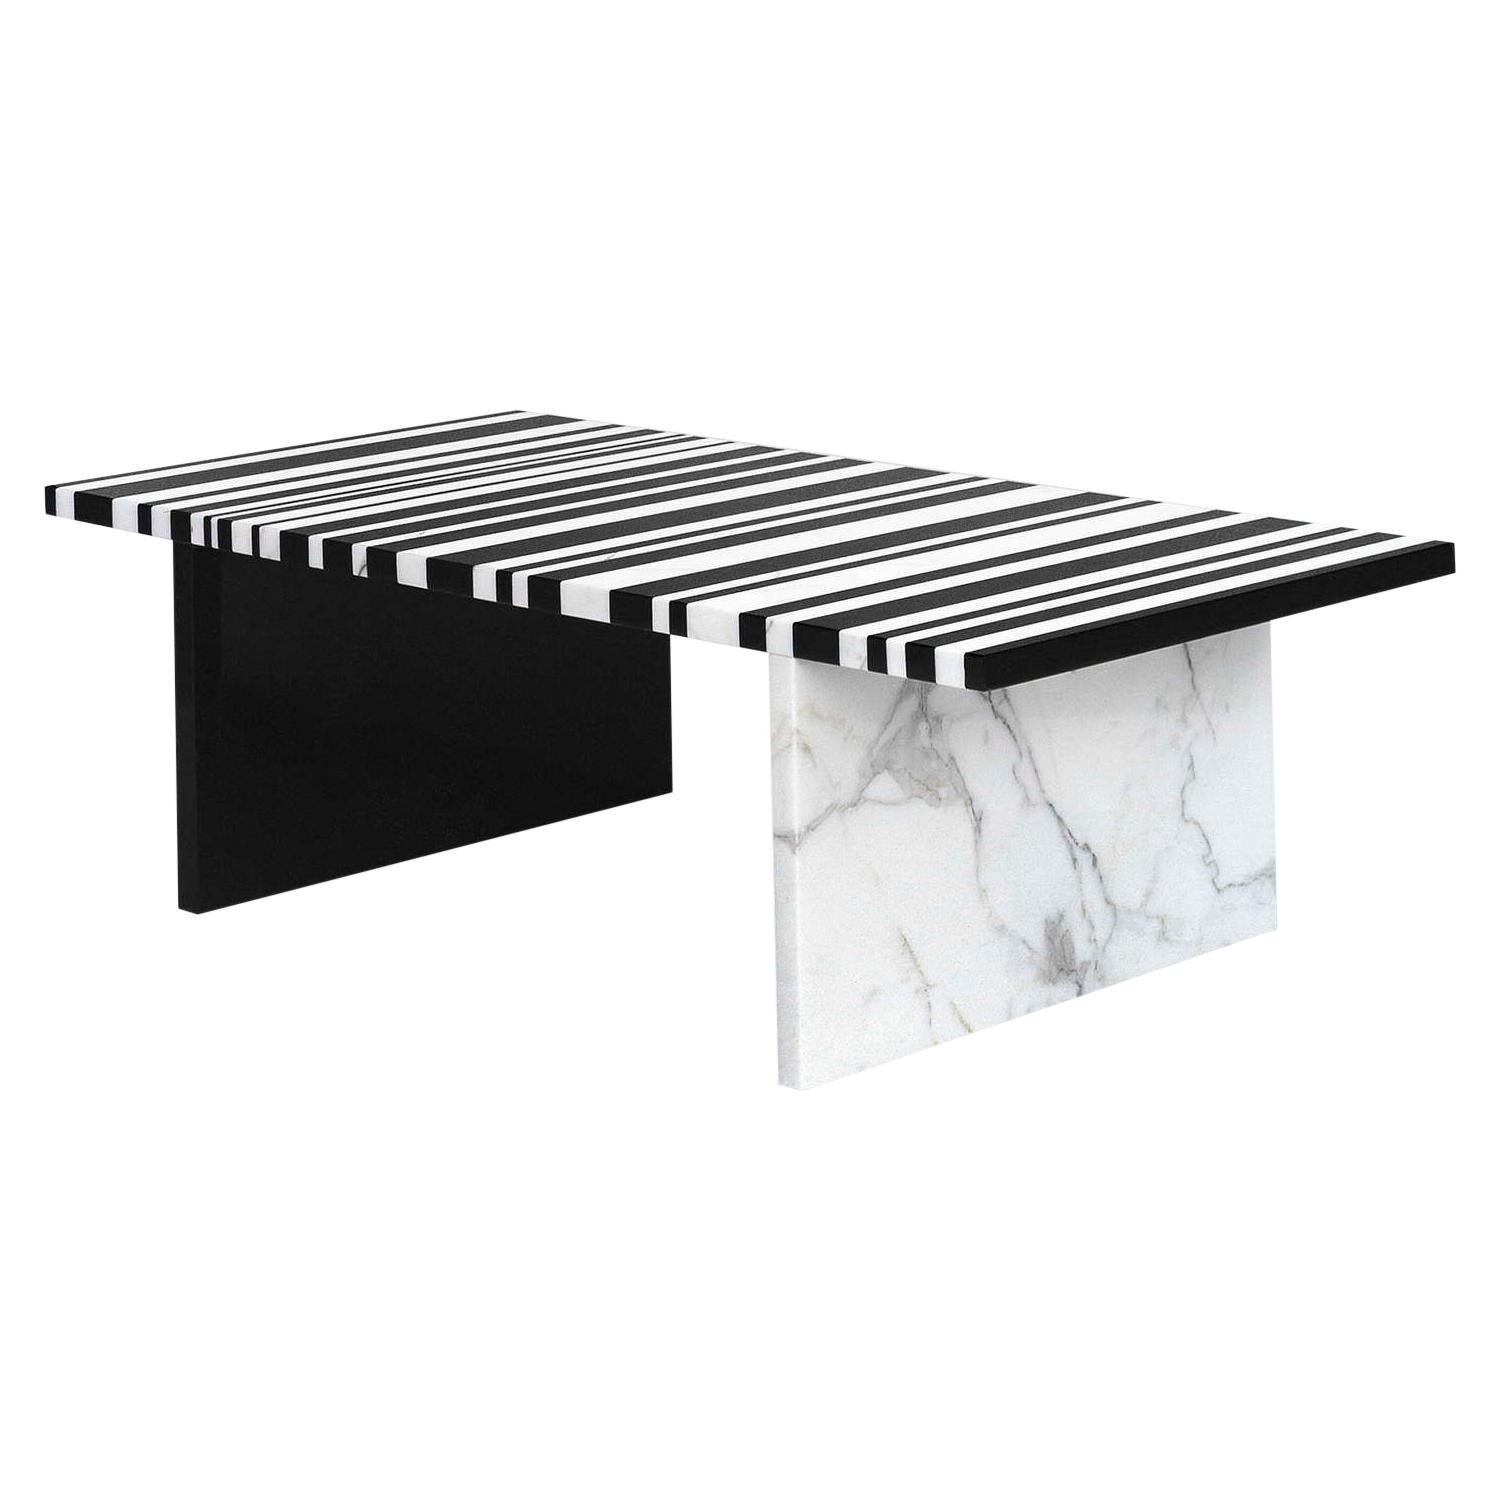 21st Century by E.Sabatini "CODICE A BARRE" Black & White Marble Coffee Table For Sale